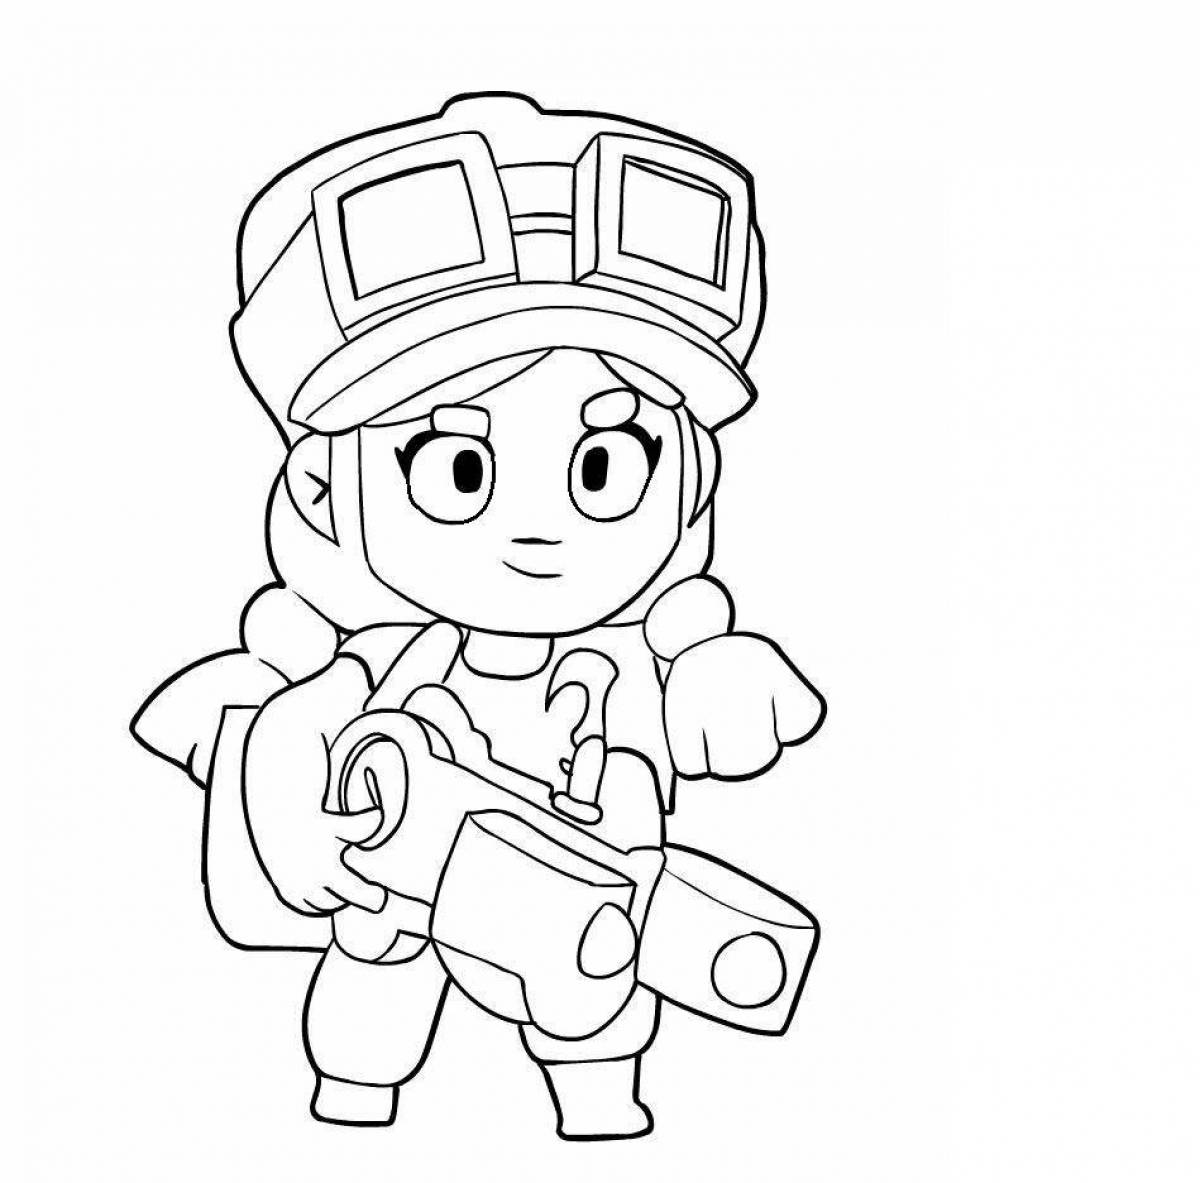 Attractive dynamike coloring page